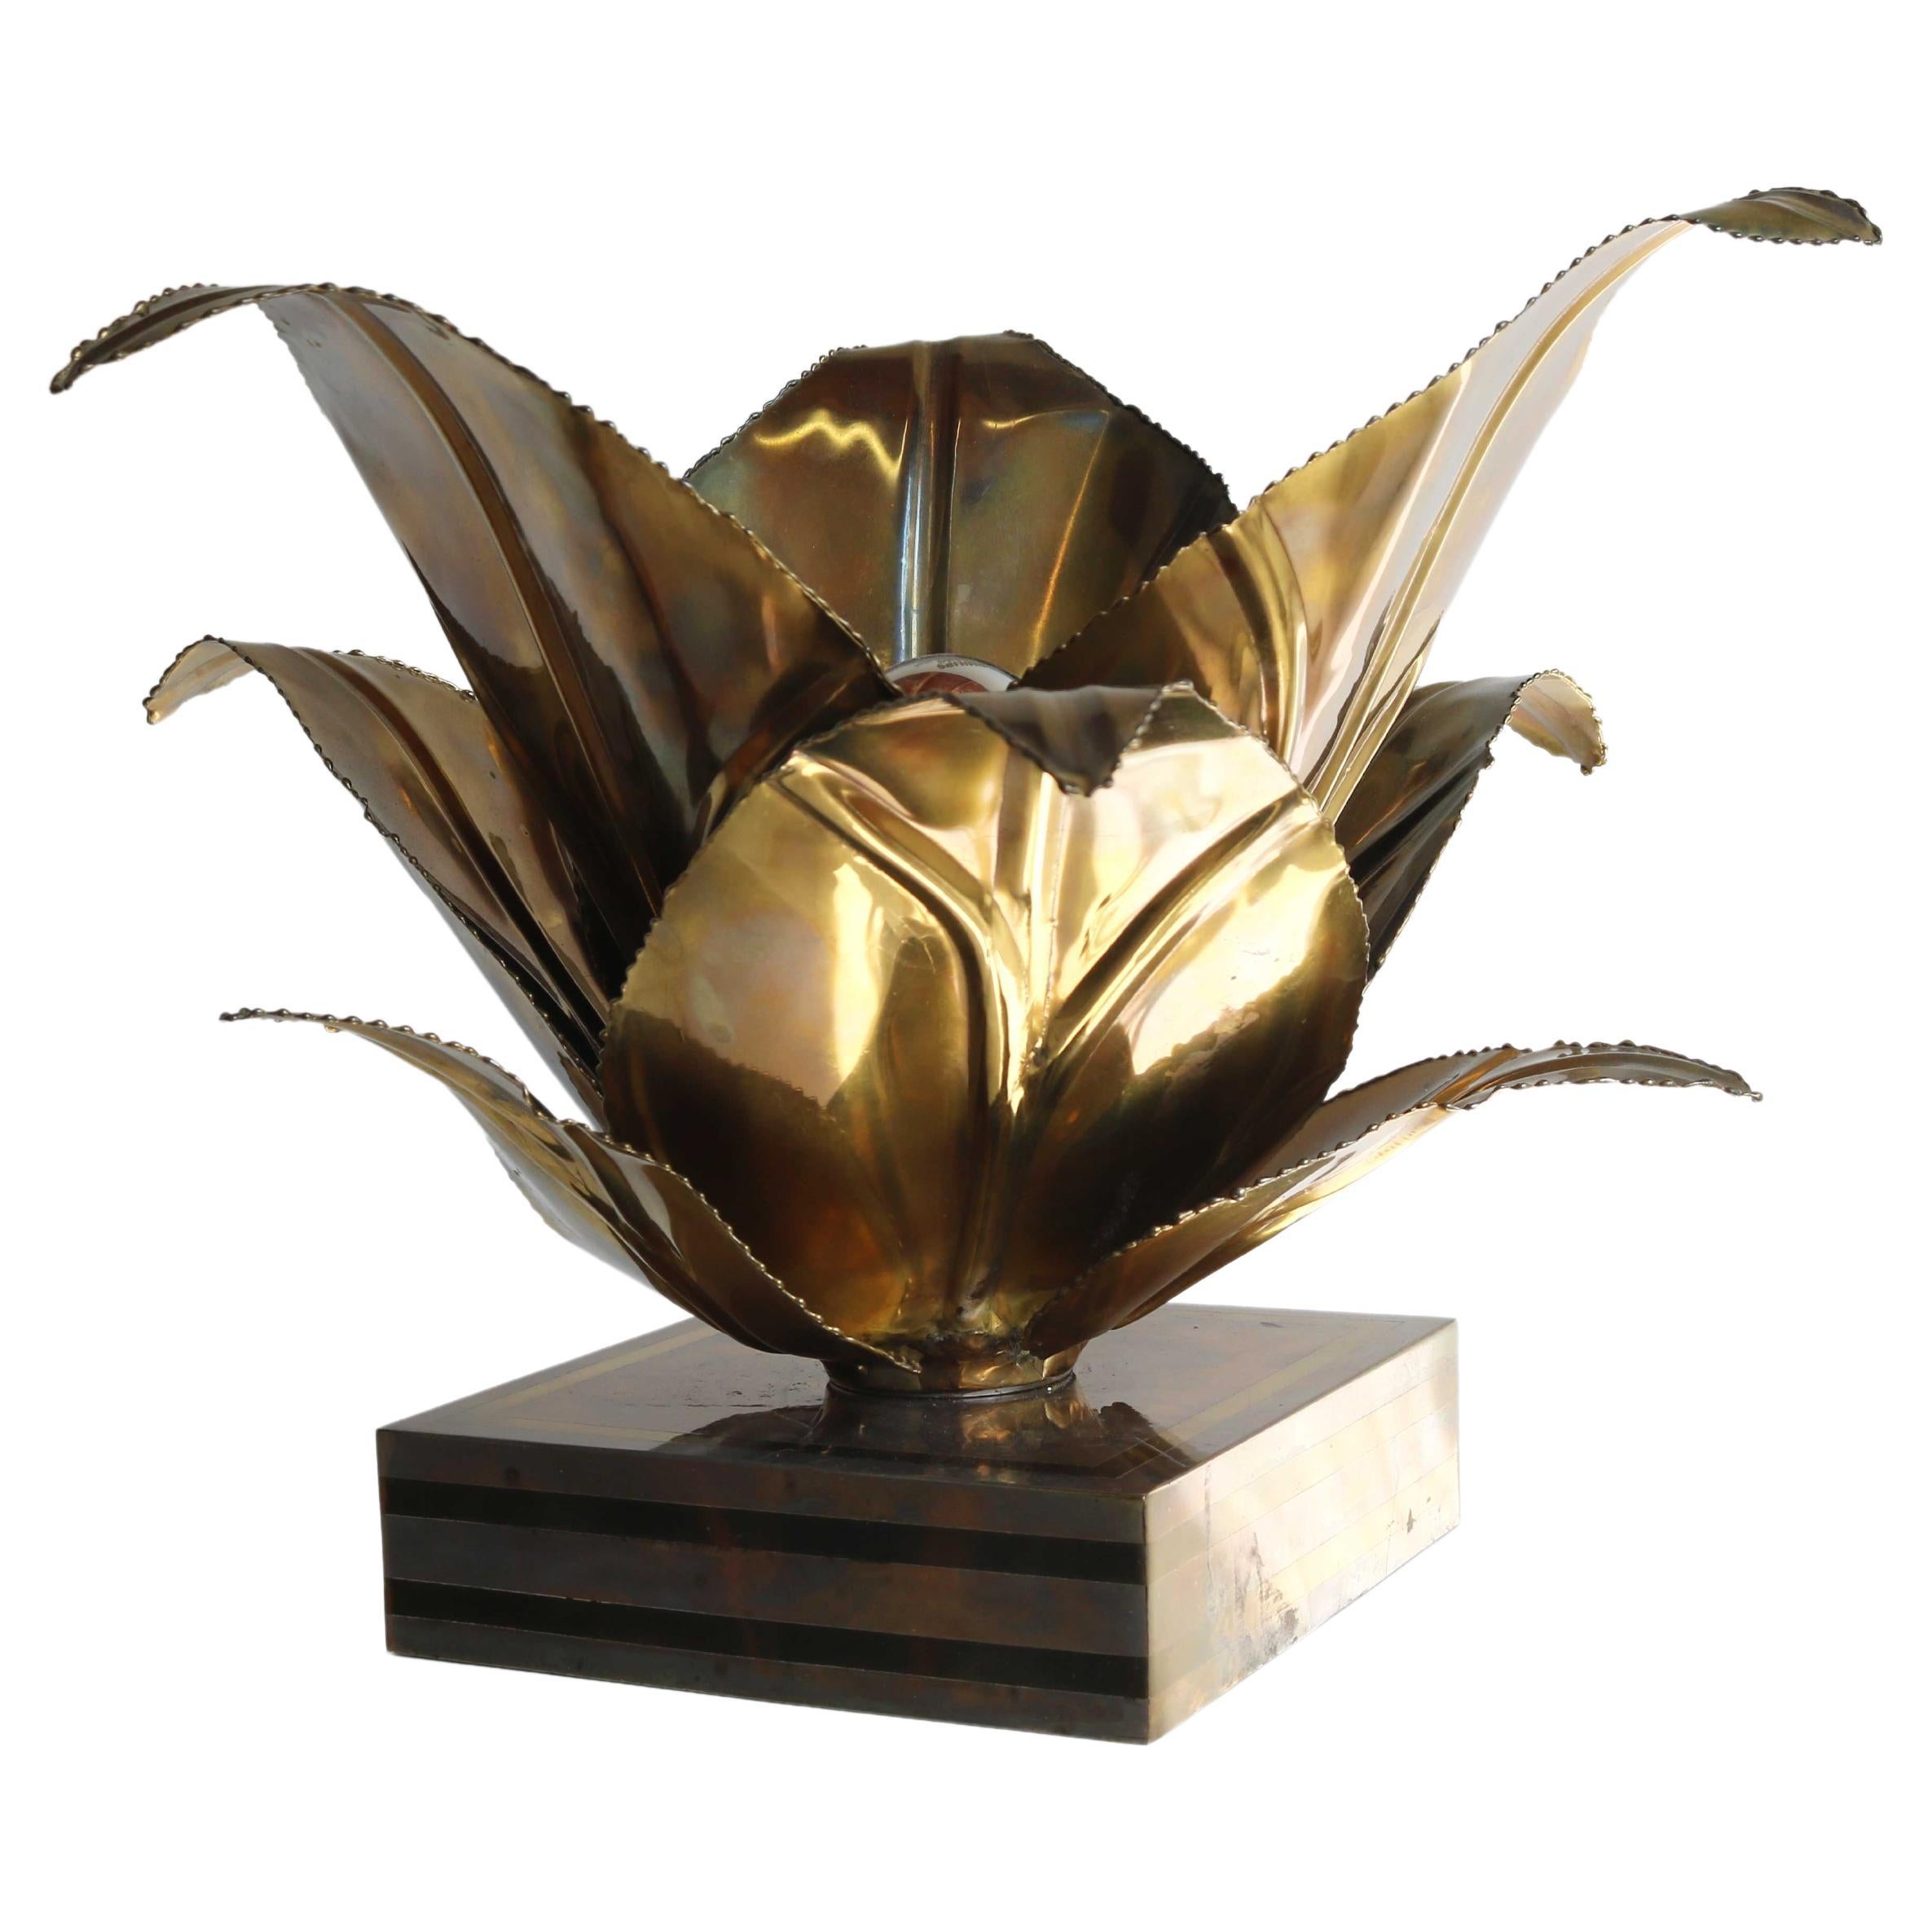 Highly decorative floral ‘Aloe’ table lamp by Maison Jansen, with torch cut patinated brass leafs. France ca. 1960-1970s

A Incredible 1960's Maison Jansen table lamp in the the form of an Aloe Vera plant. Produced during the 1960-1970’s in Paris.